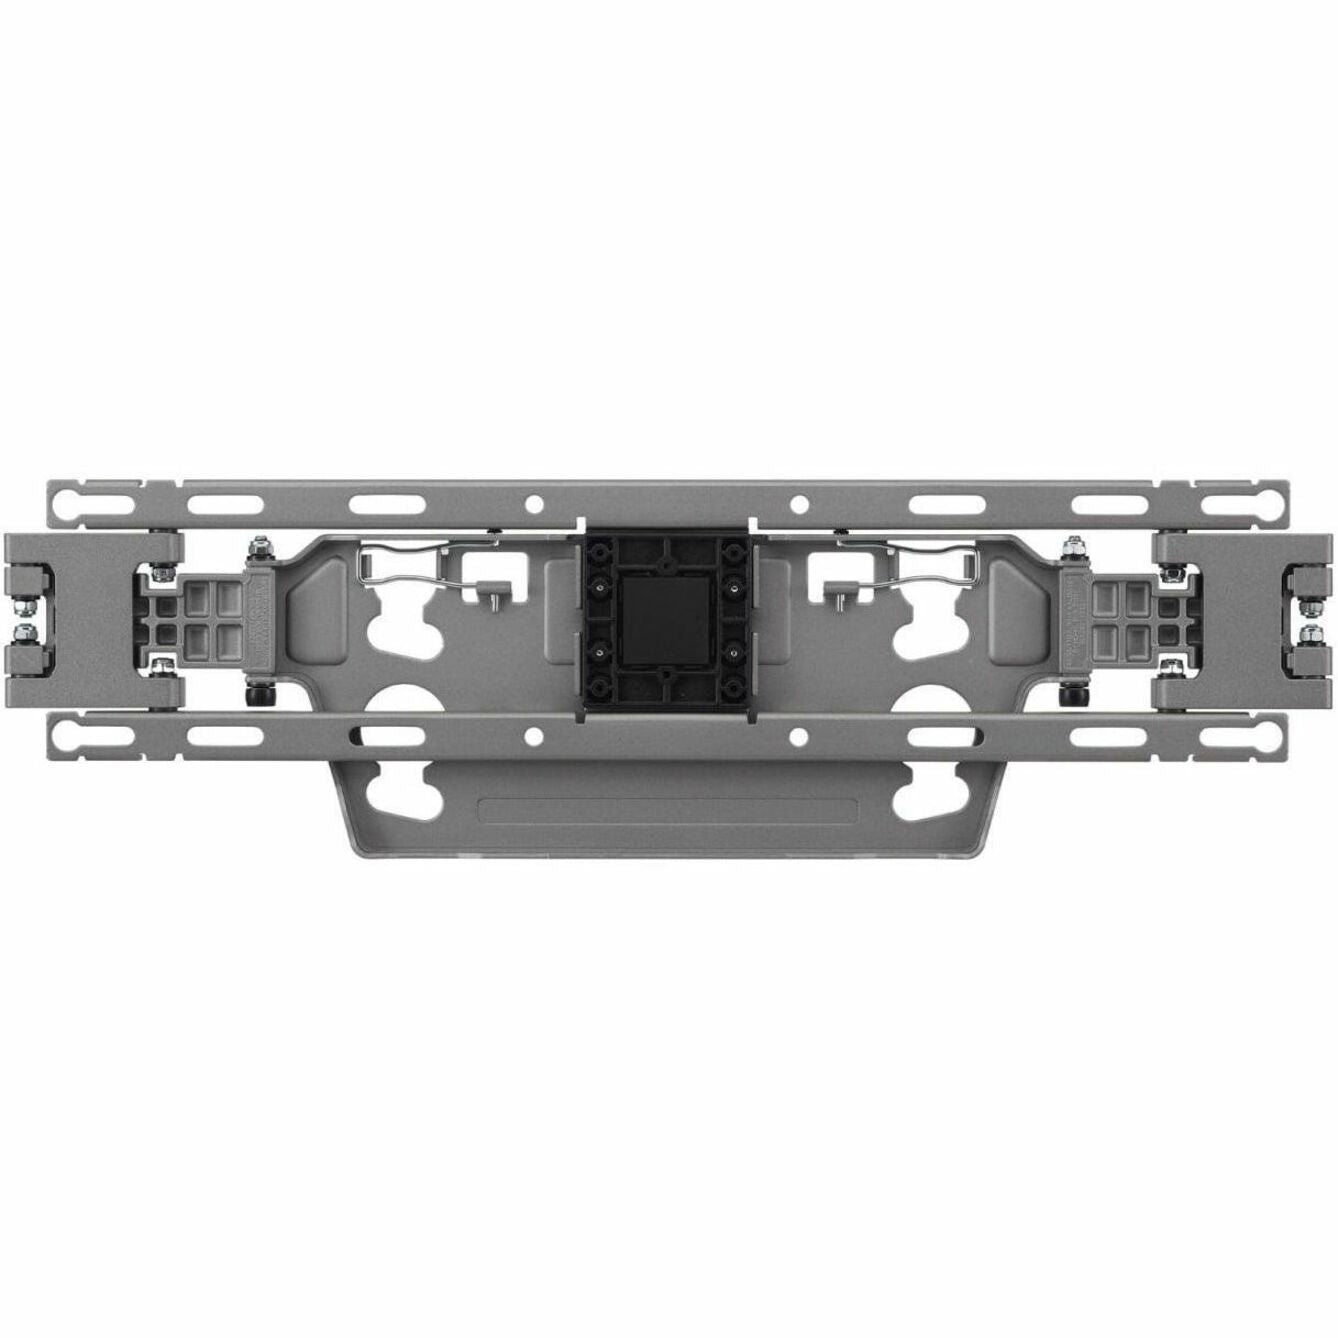 LG Wall Mount for OLED TV